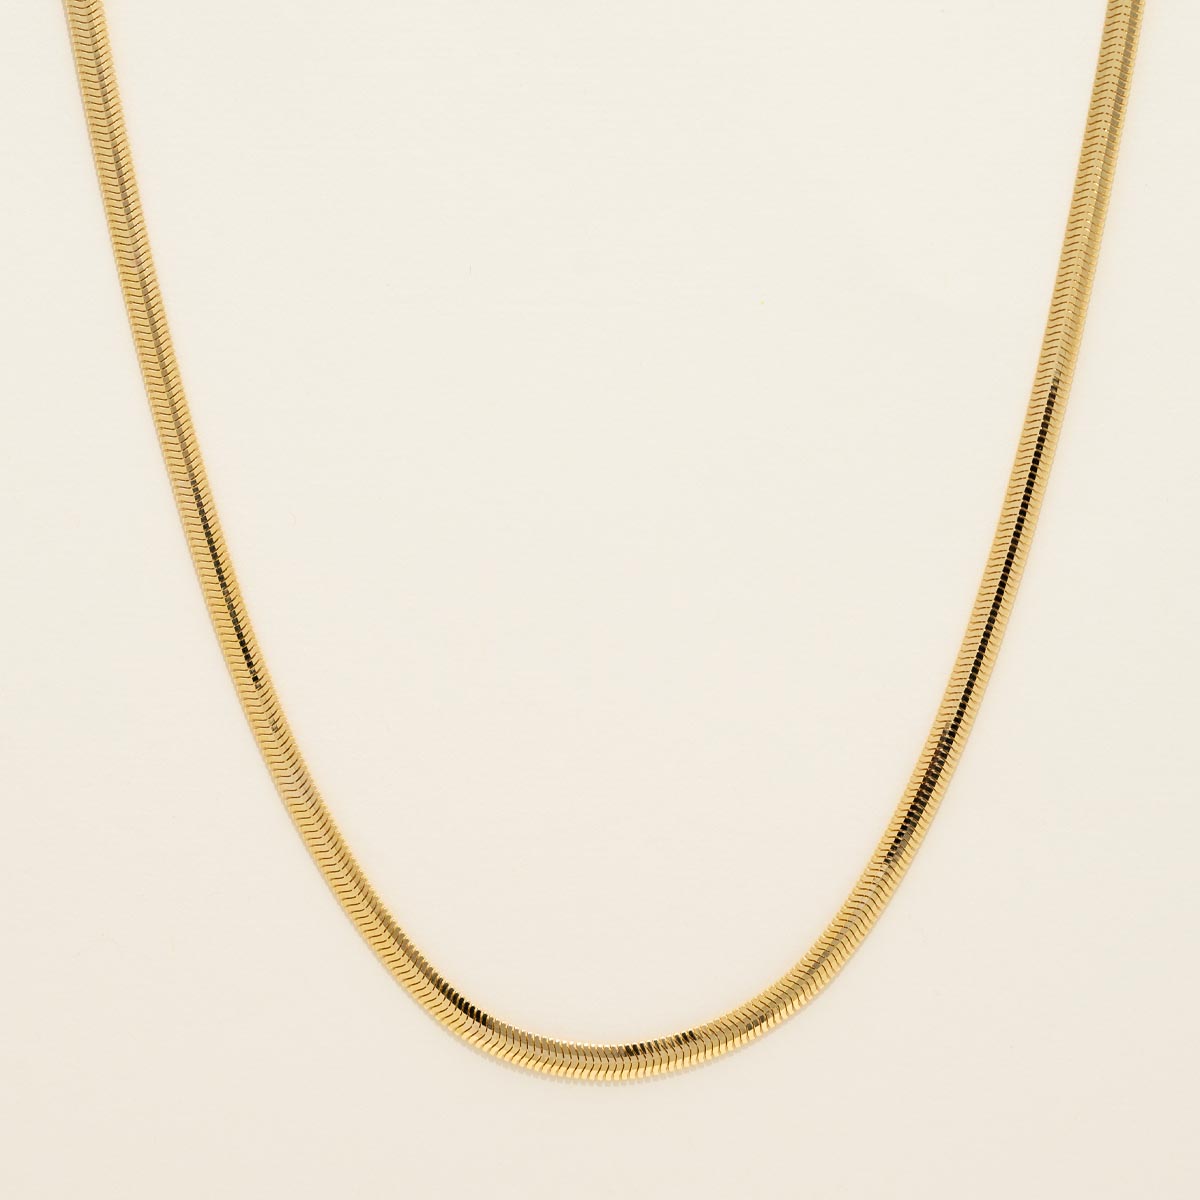 Oval Snake Chain in 14kt Yellow Gold (18 inches and 4.2mm wide)